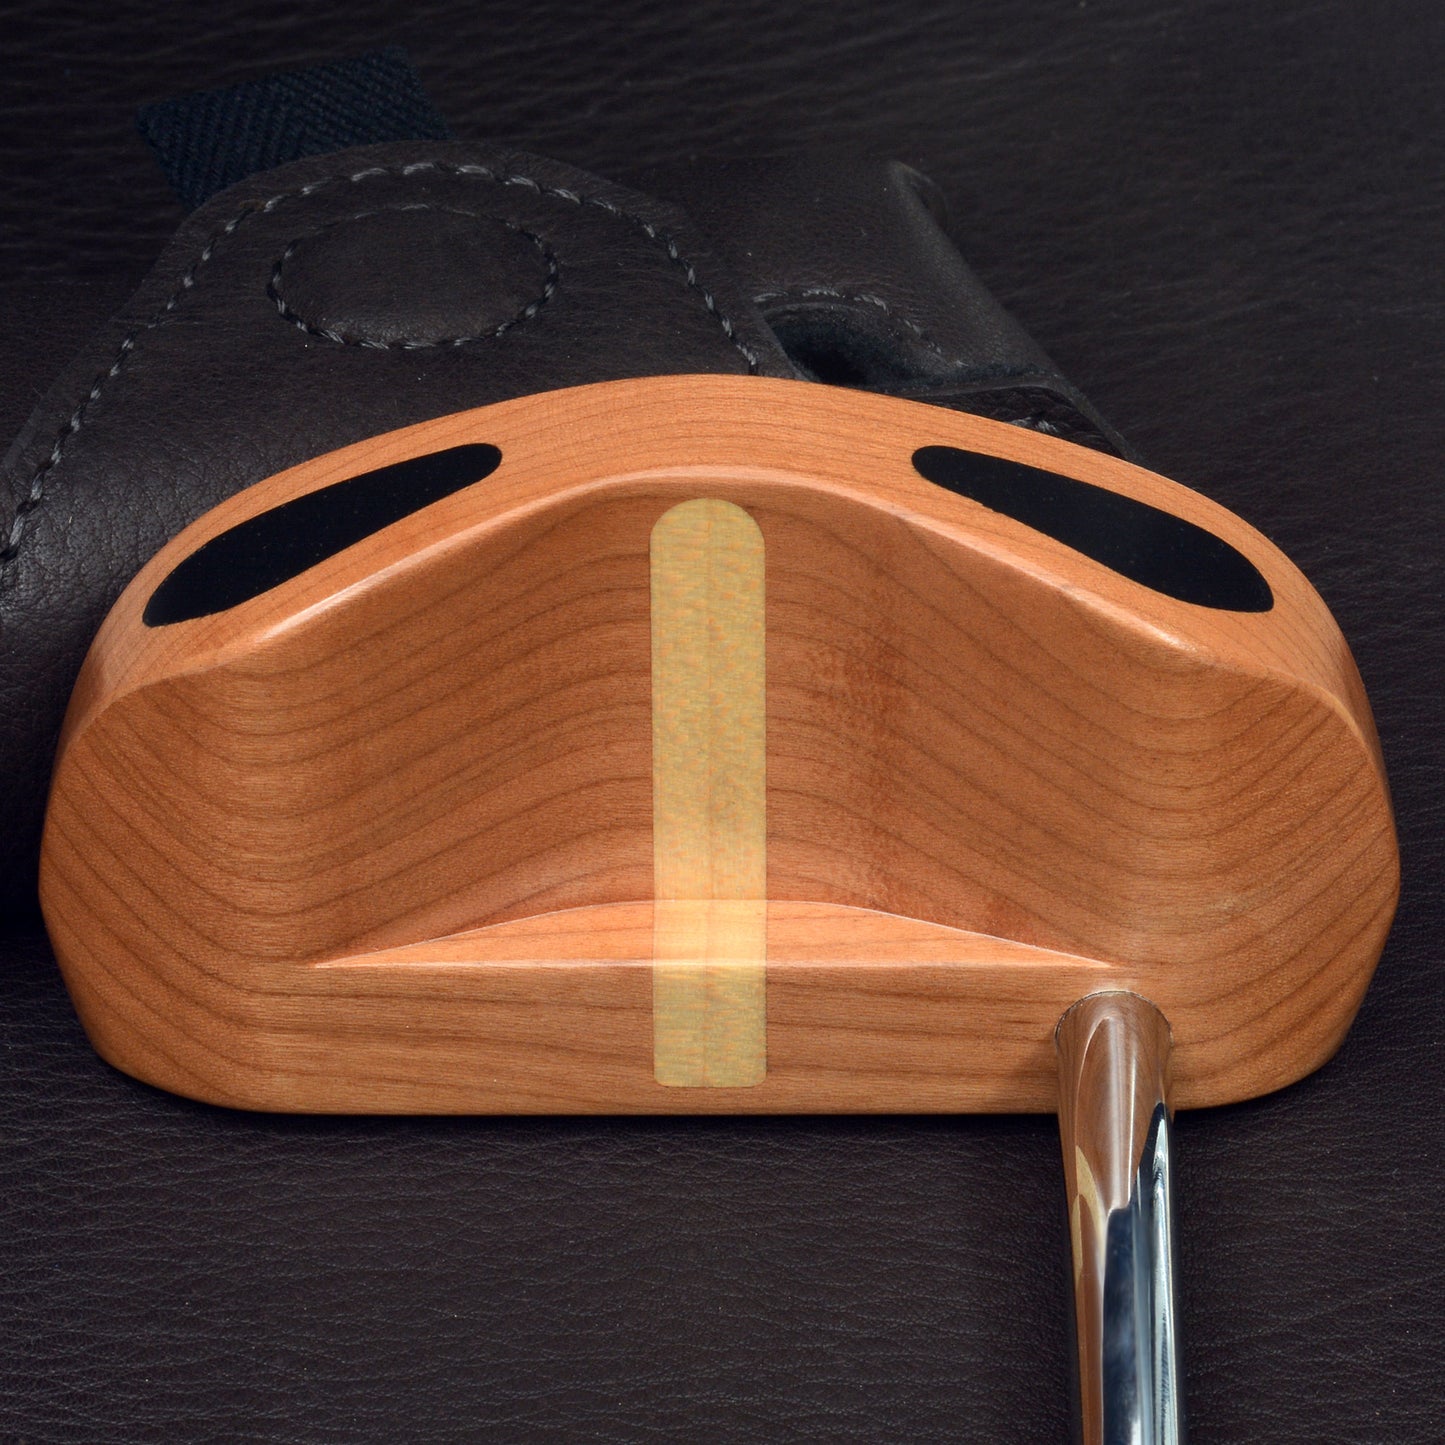 CP2022 cherry and copper golf putter